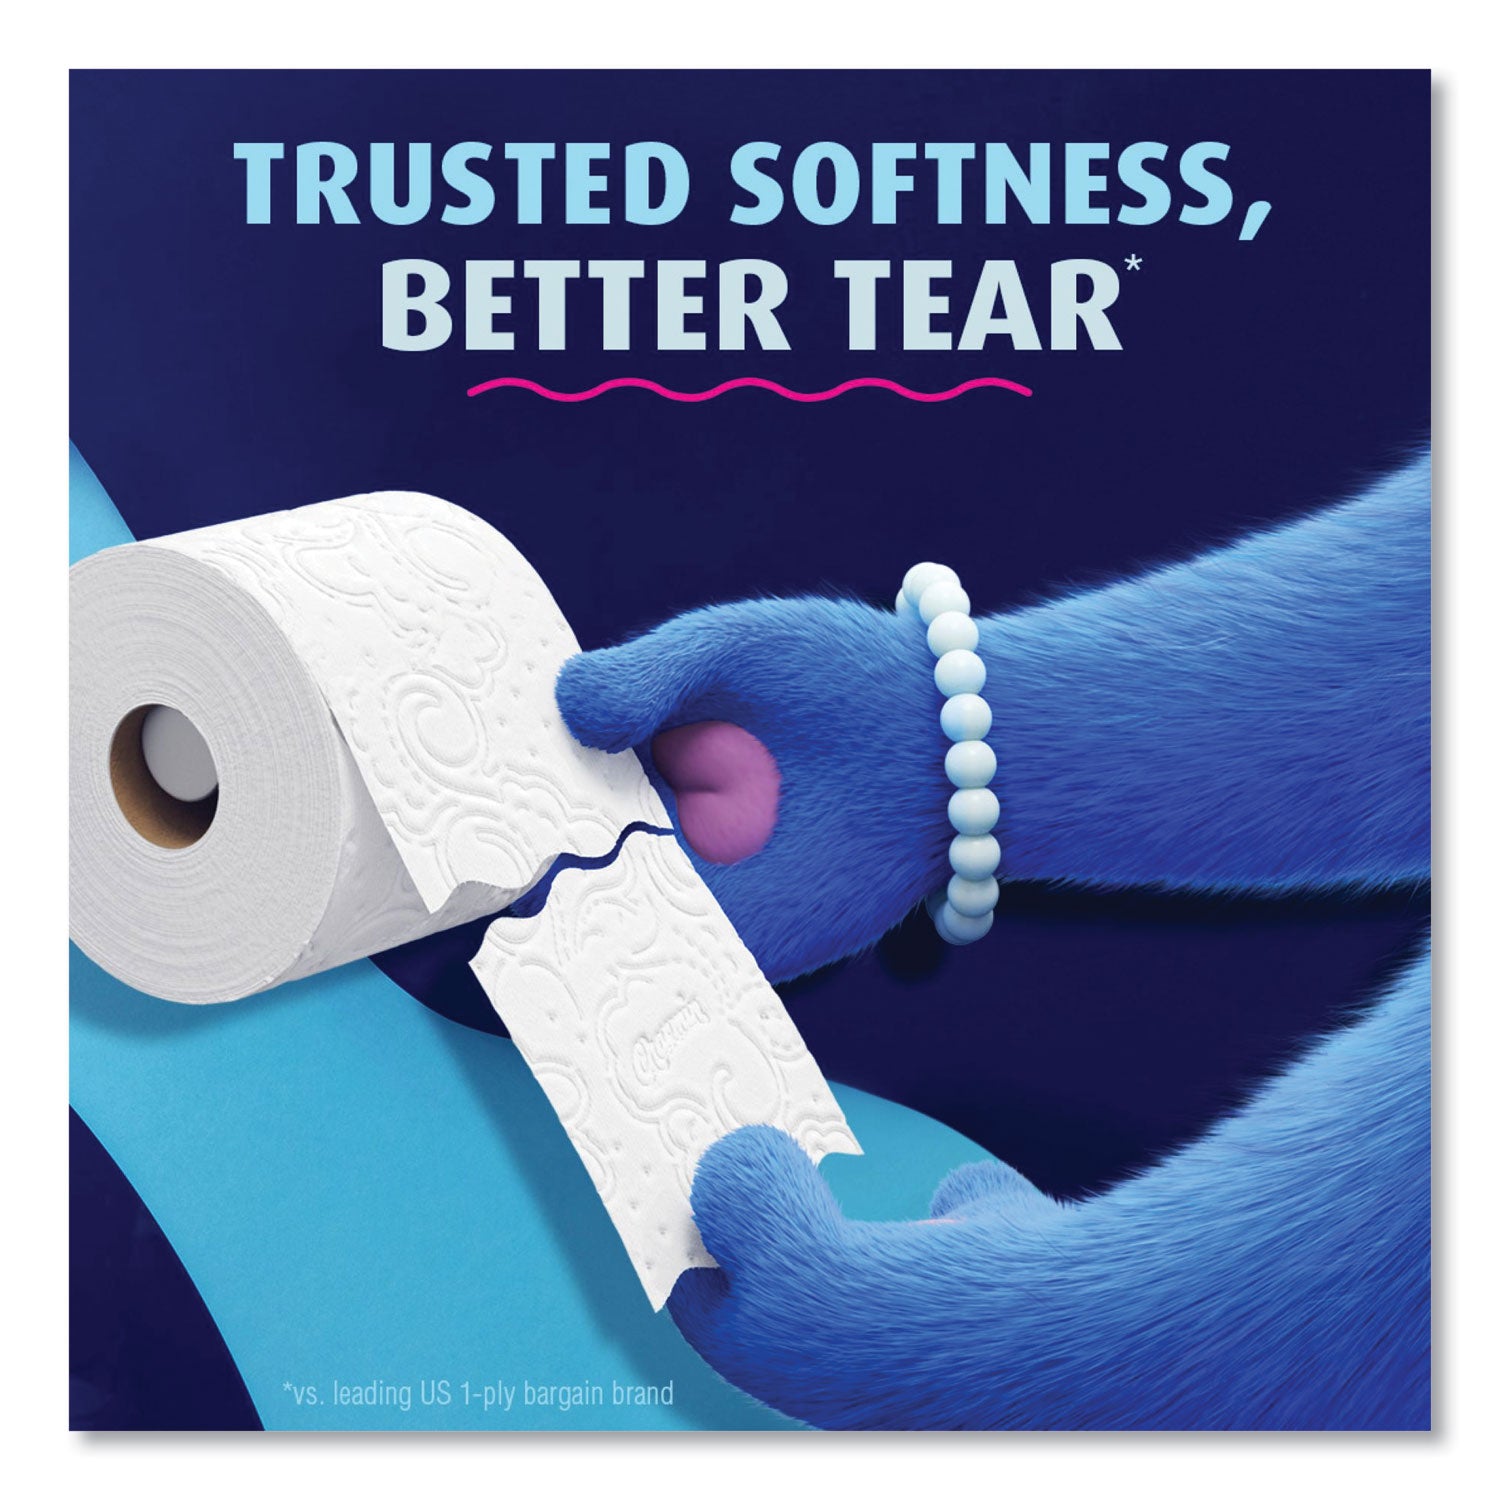 ultra-soft-bathroom-tissue-septic-safe-2-ply-white-224-sheets-roll-4-rolls-pack_pgc08806pk - 3